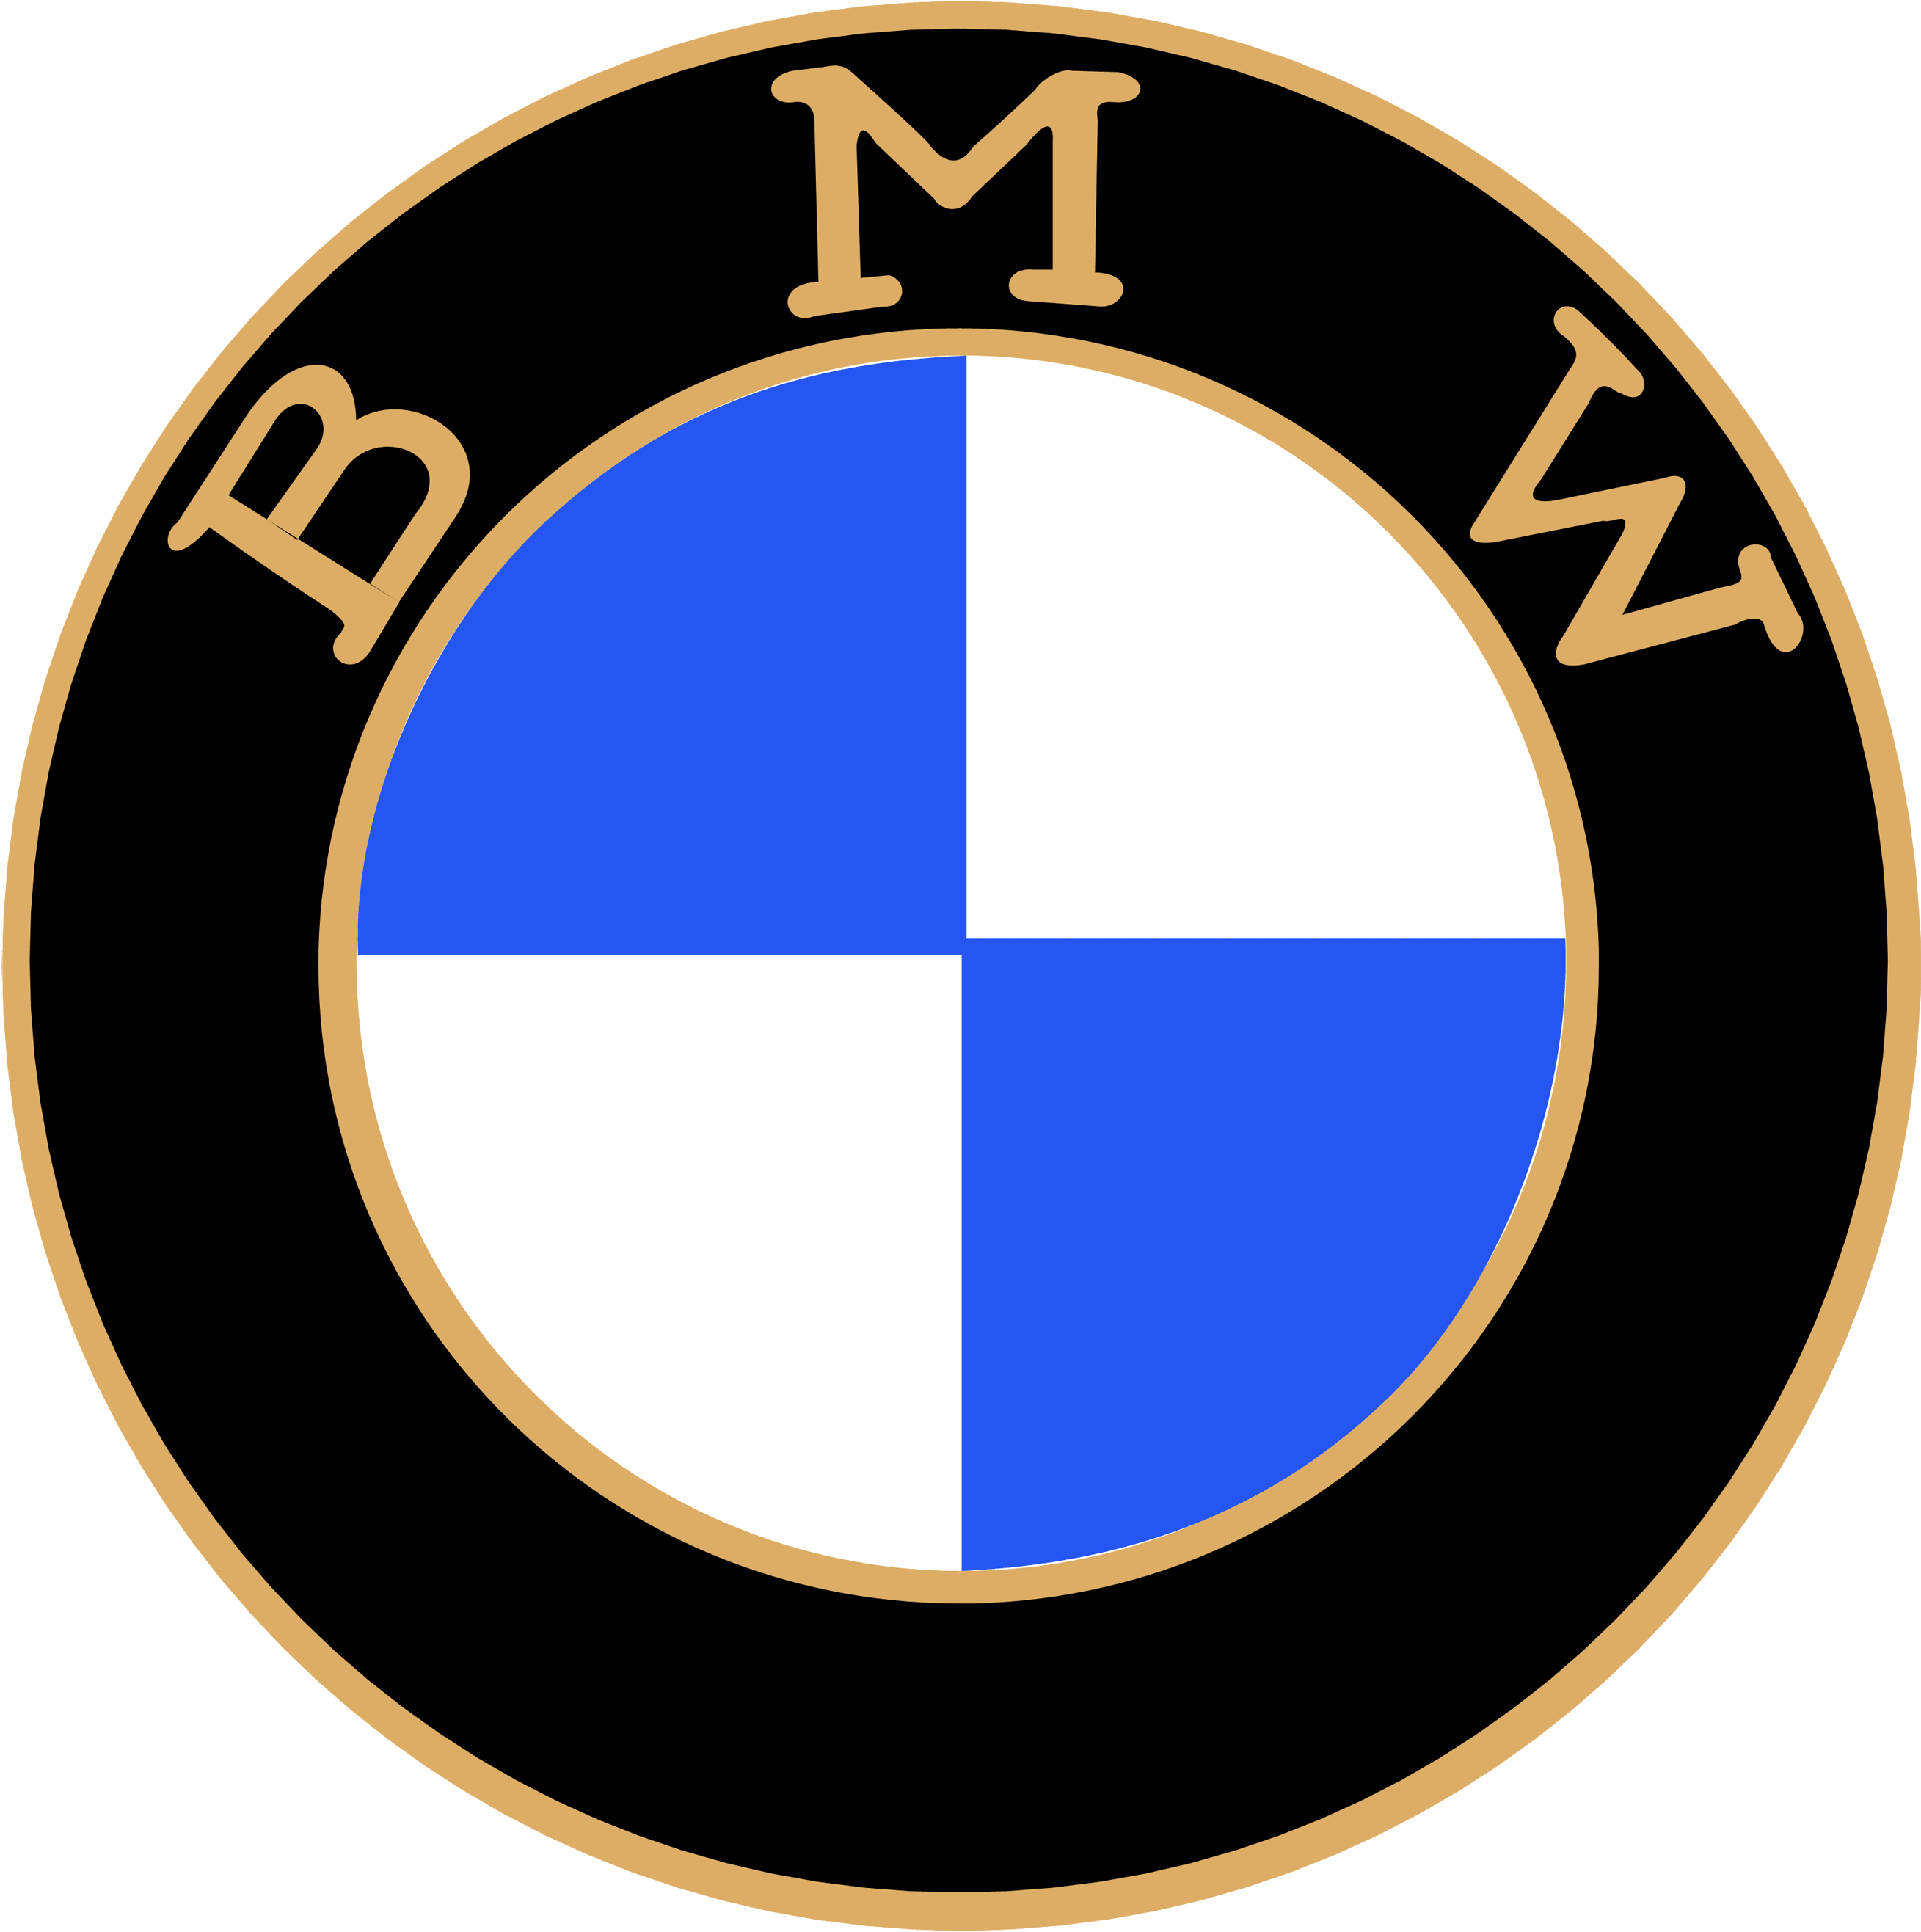 History, Meaning - Bmw Logo 1916 (2700x2715)